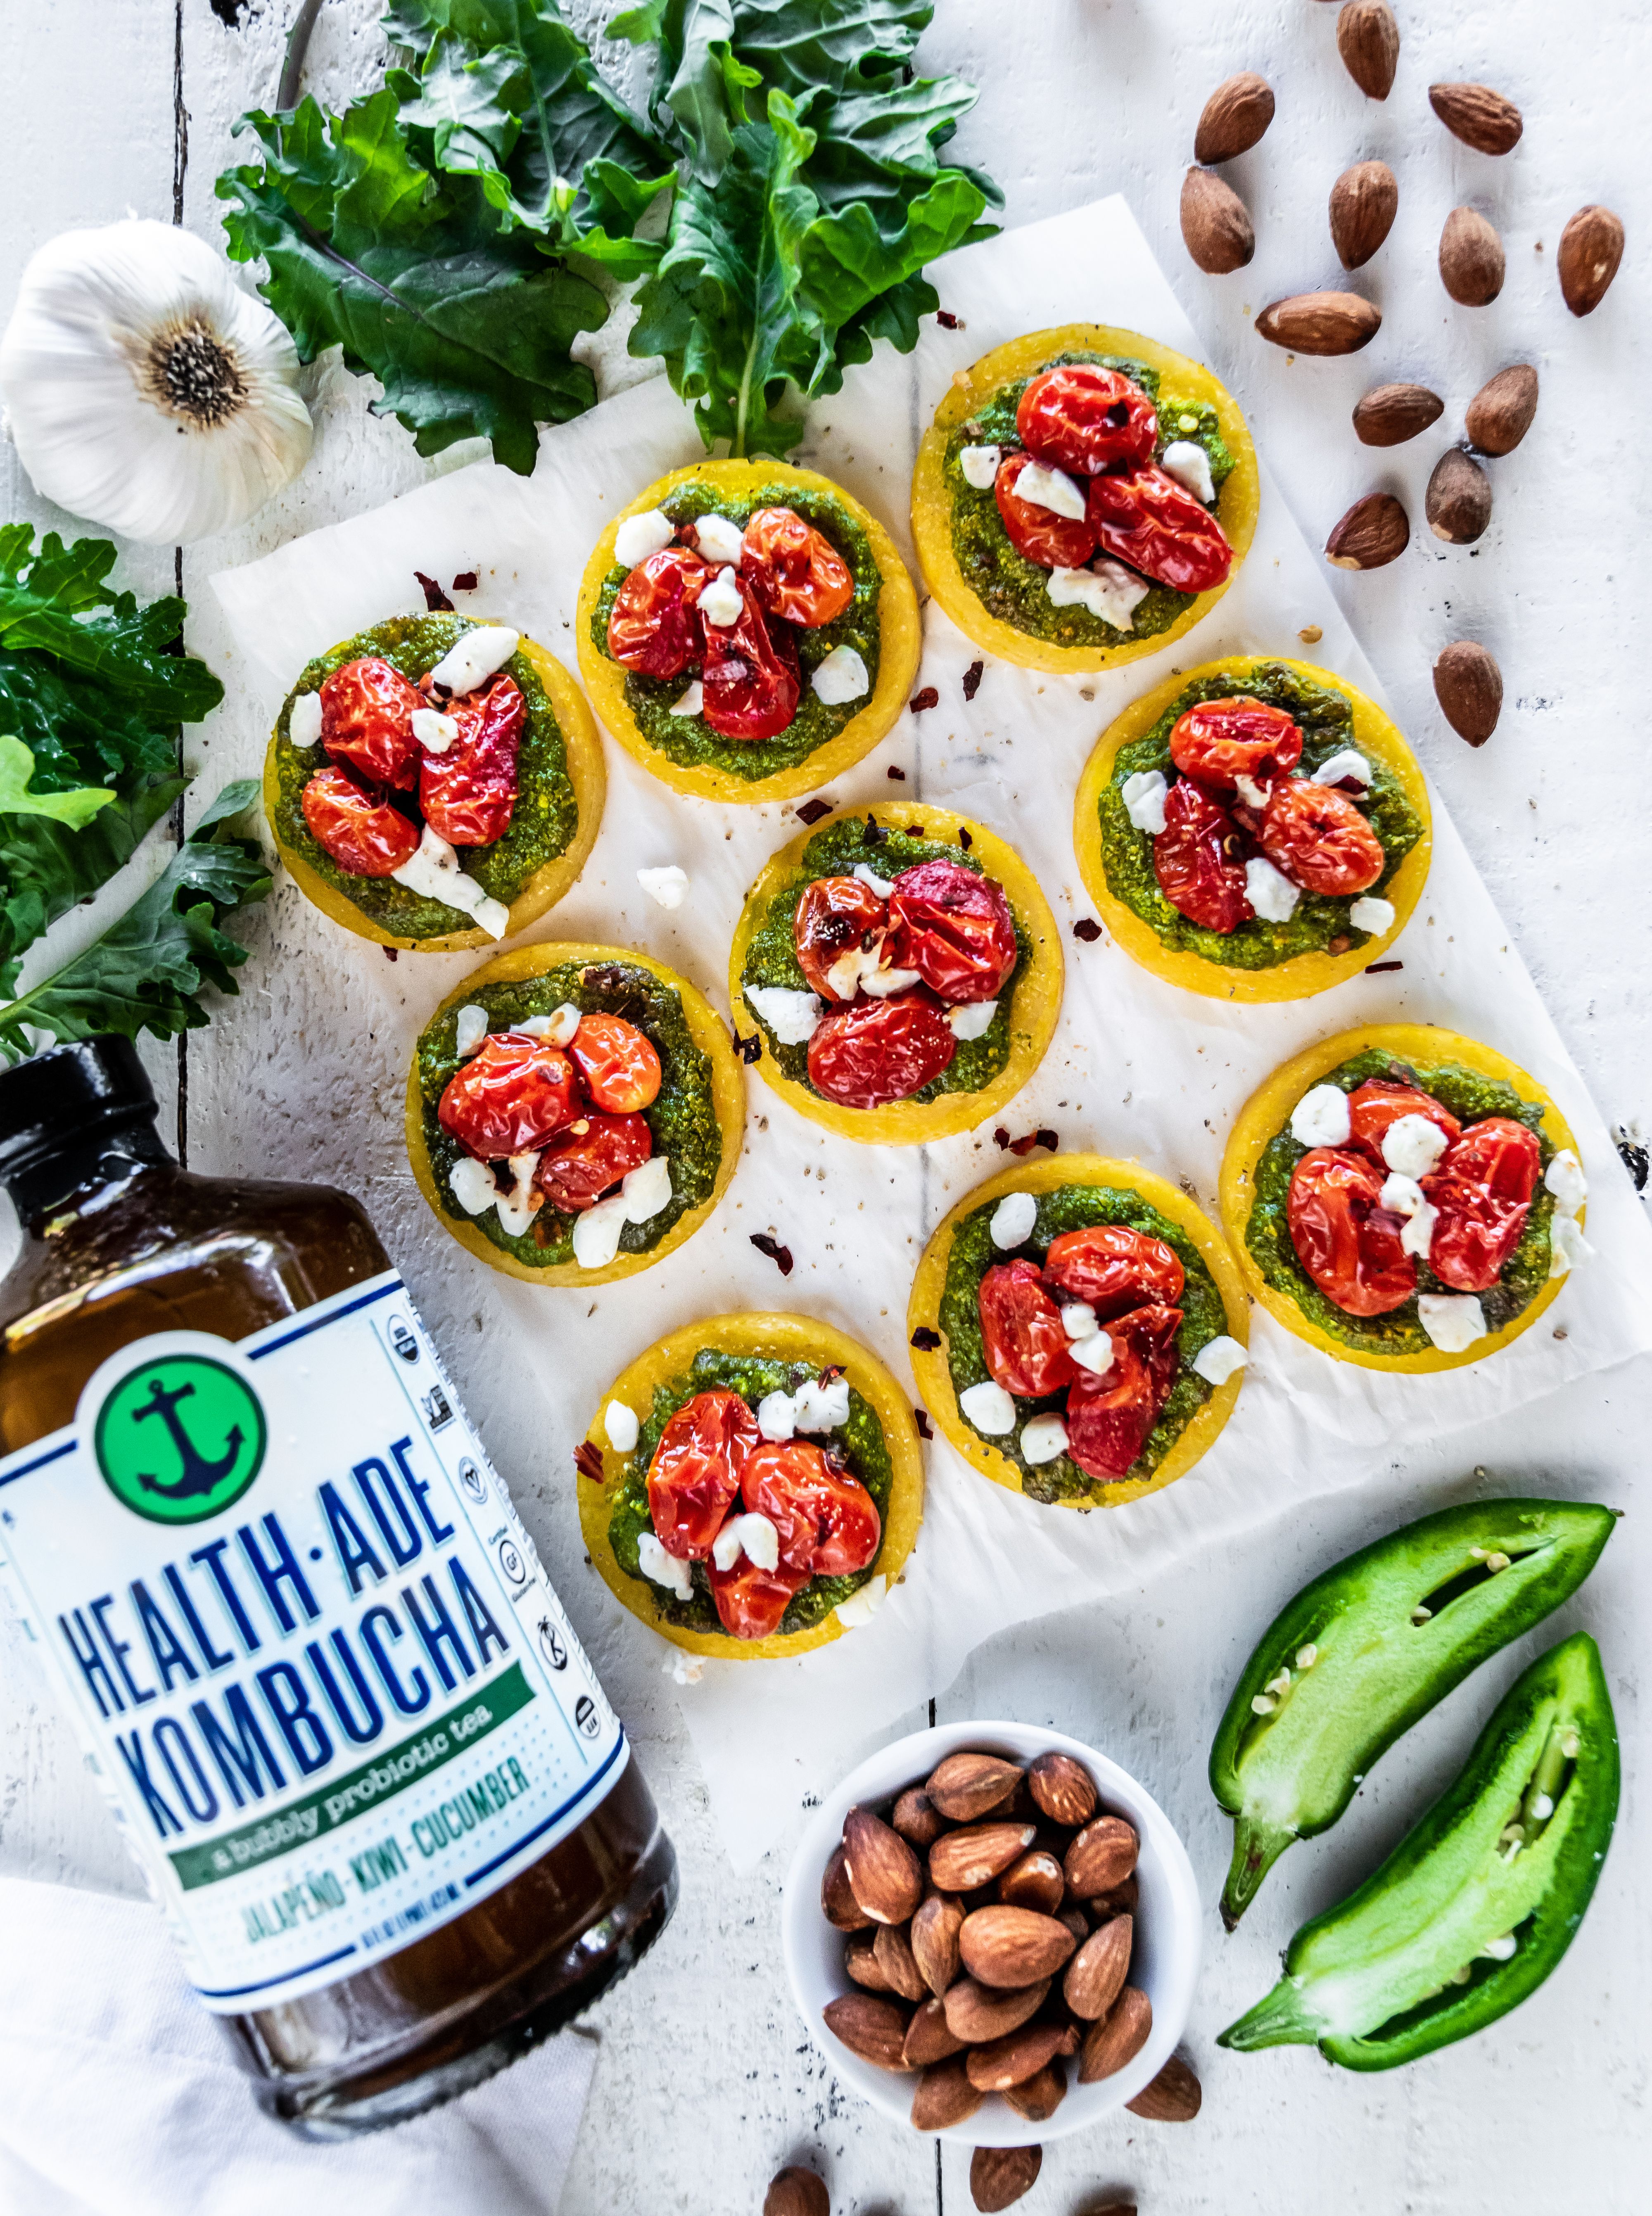 Mini pizzas with pesto, goat cheese and roasted peppers - Curiosa Living -  Lifestyle Furnishings